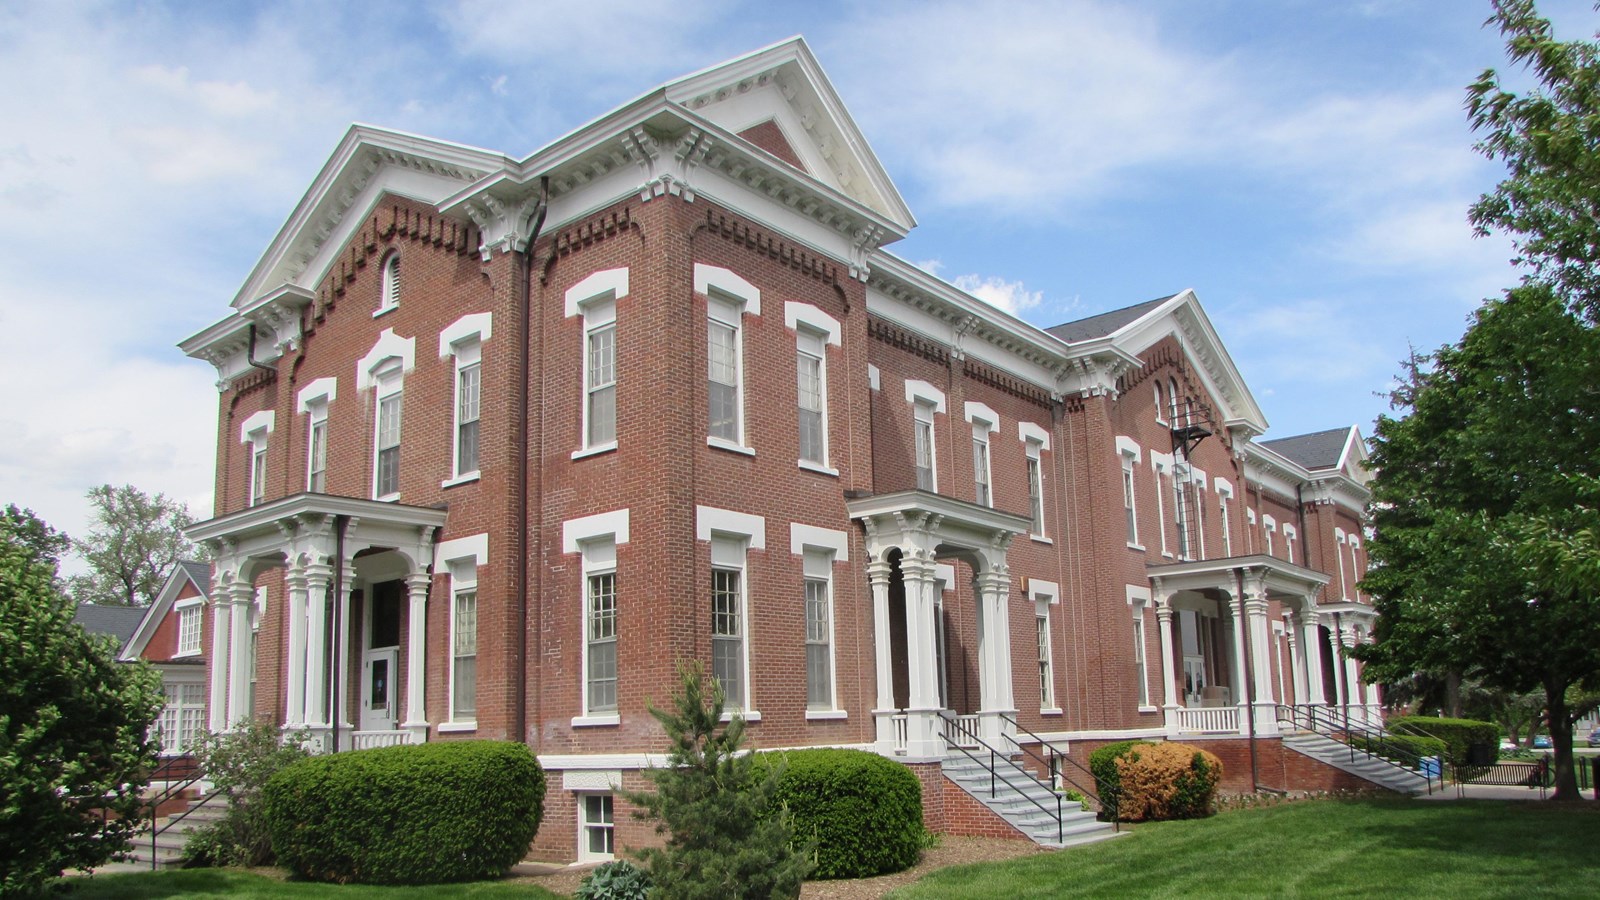 Large, brick Italianate-style headquarters building. Five front bays with small, elaborate porches.